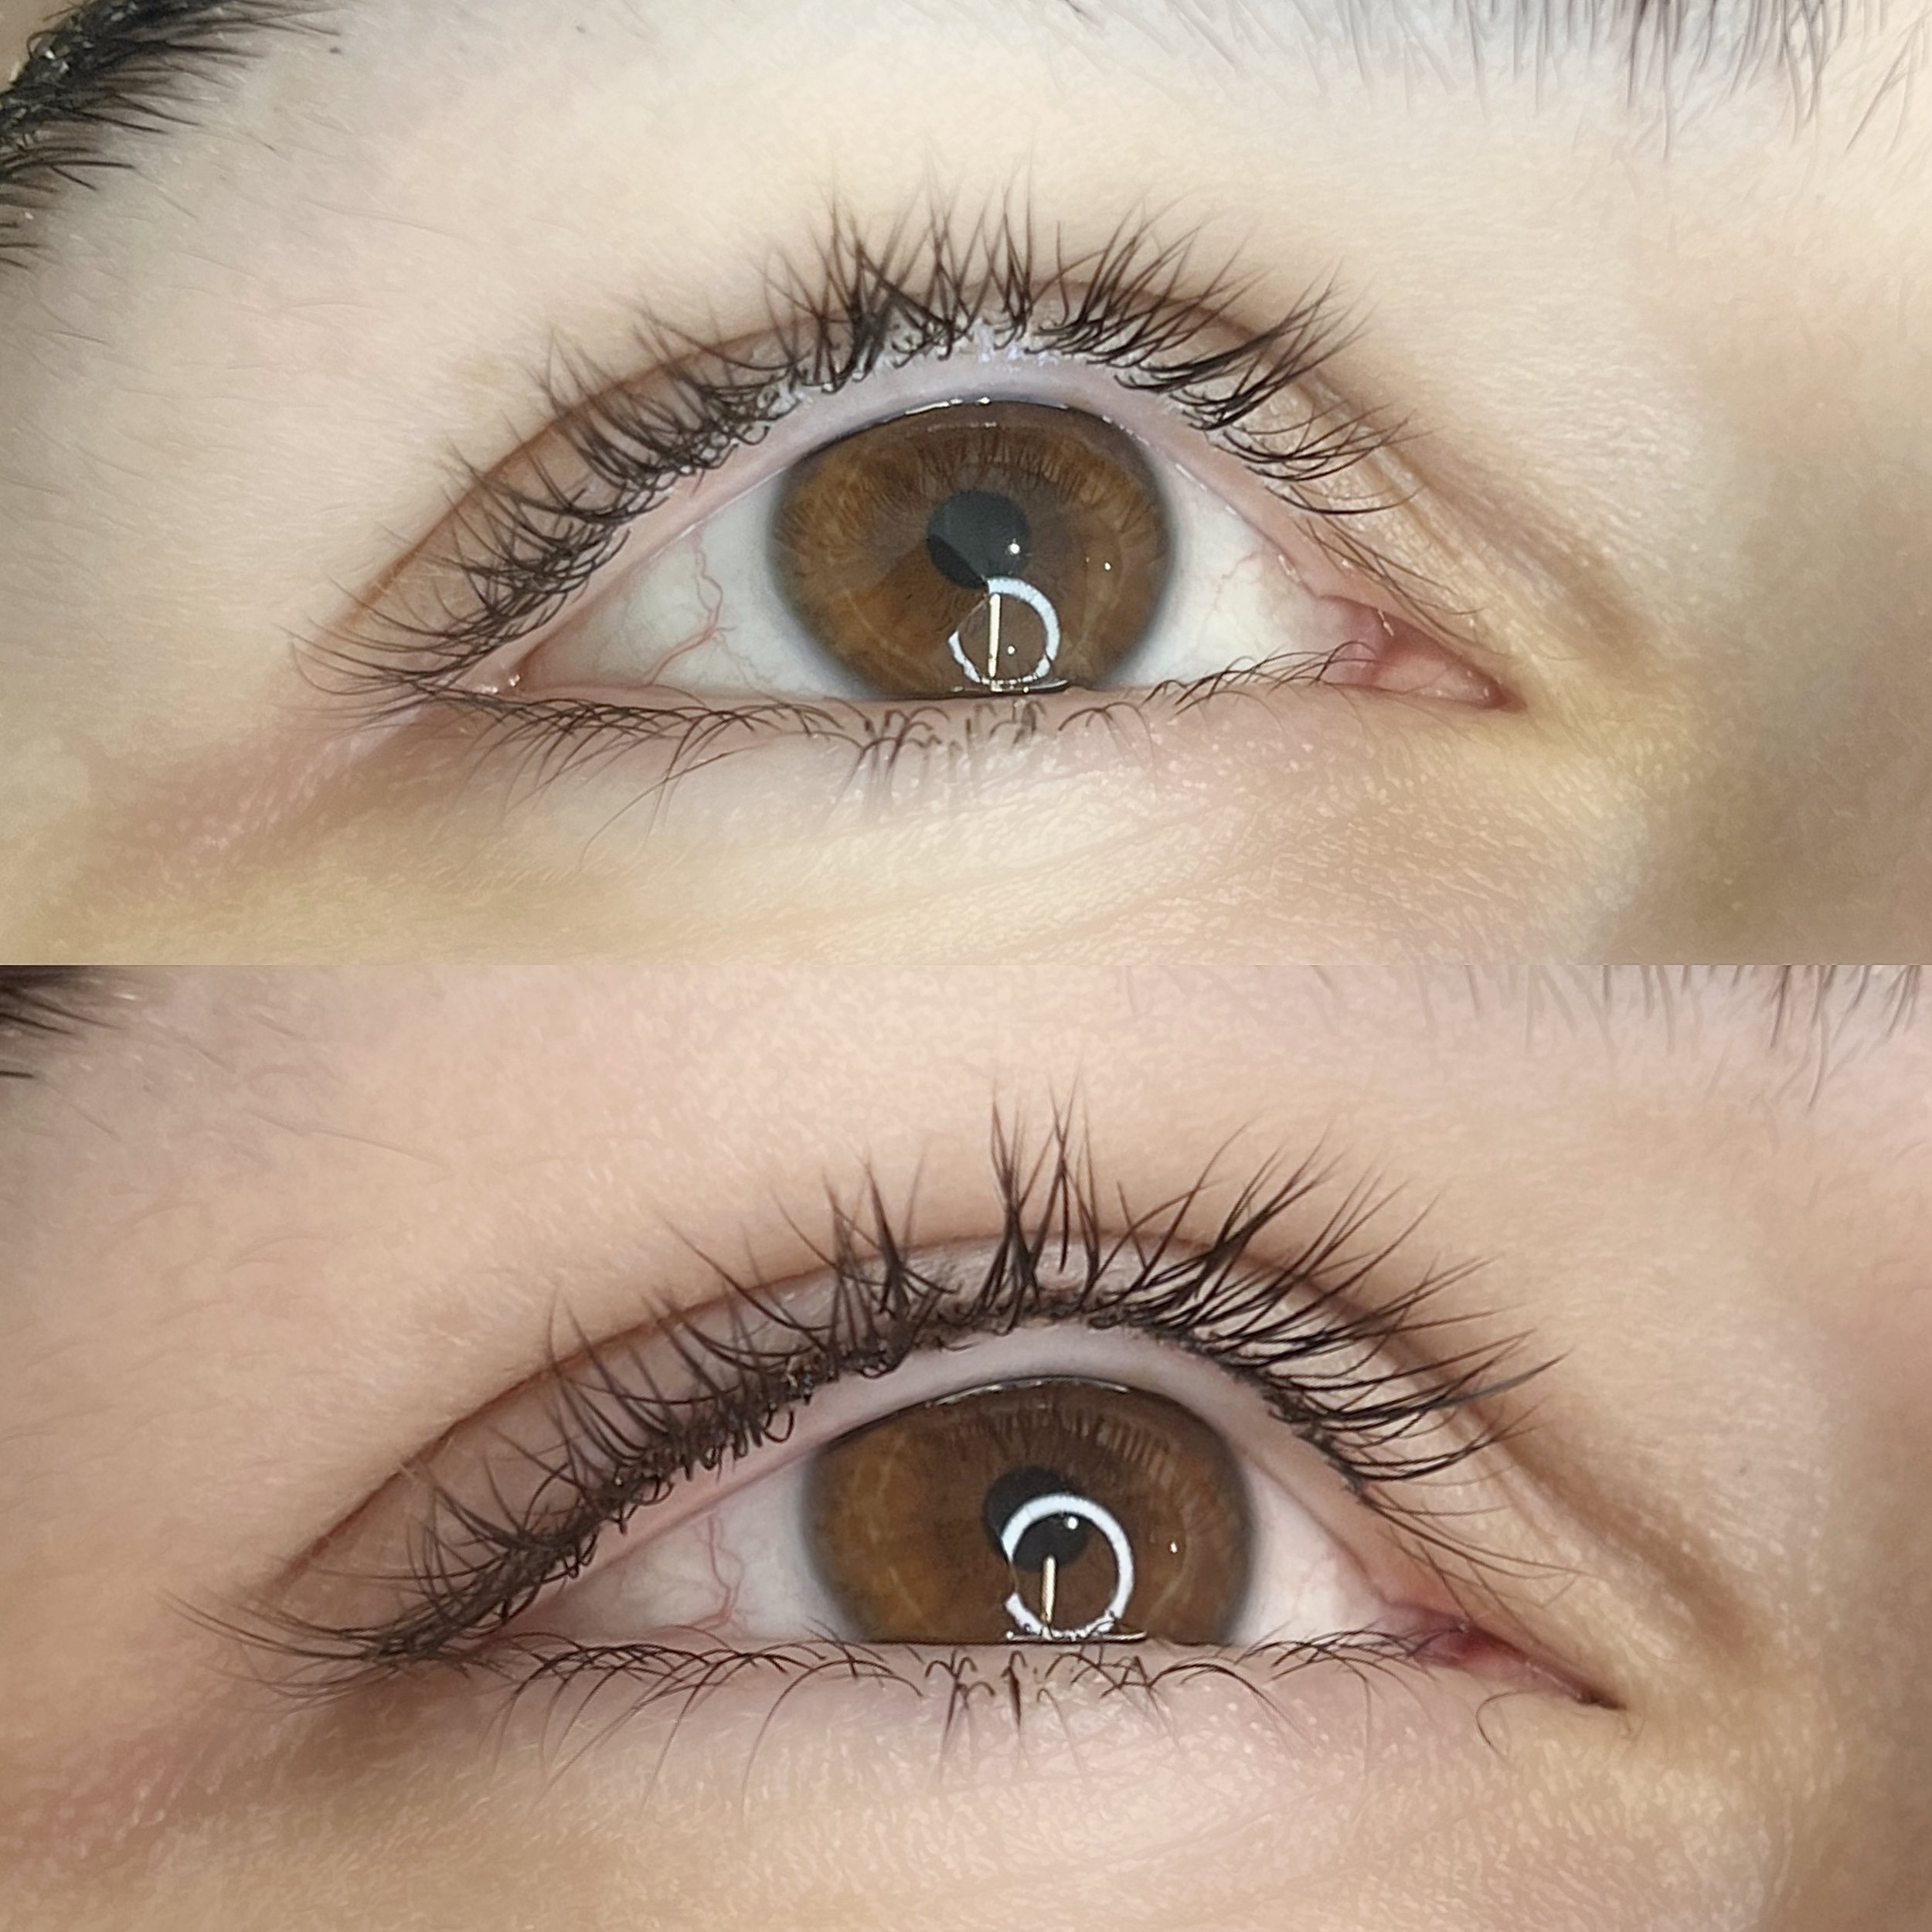 Under Eye Concealer Tattoo - Does It Work and Is It Safe?